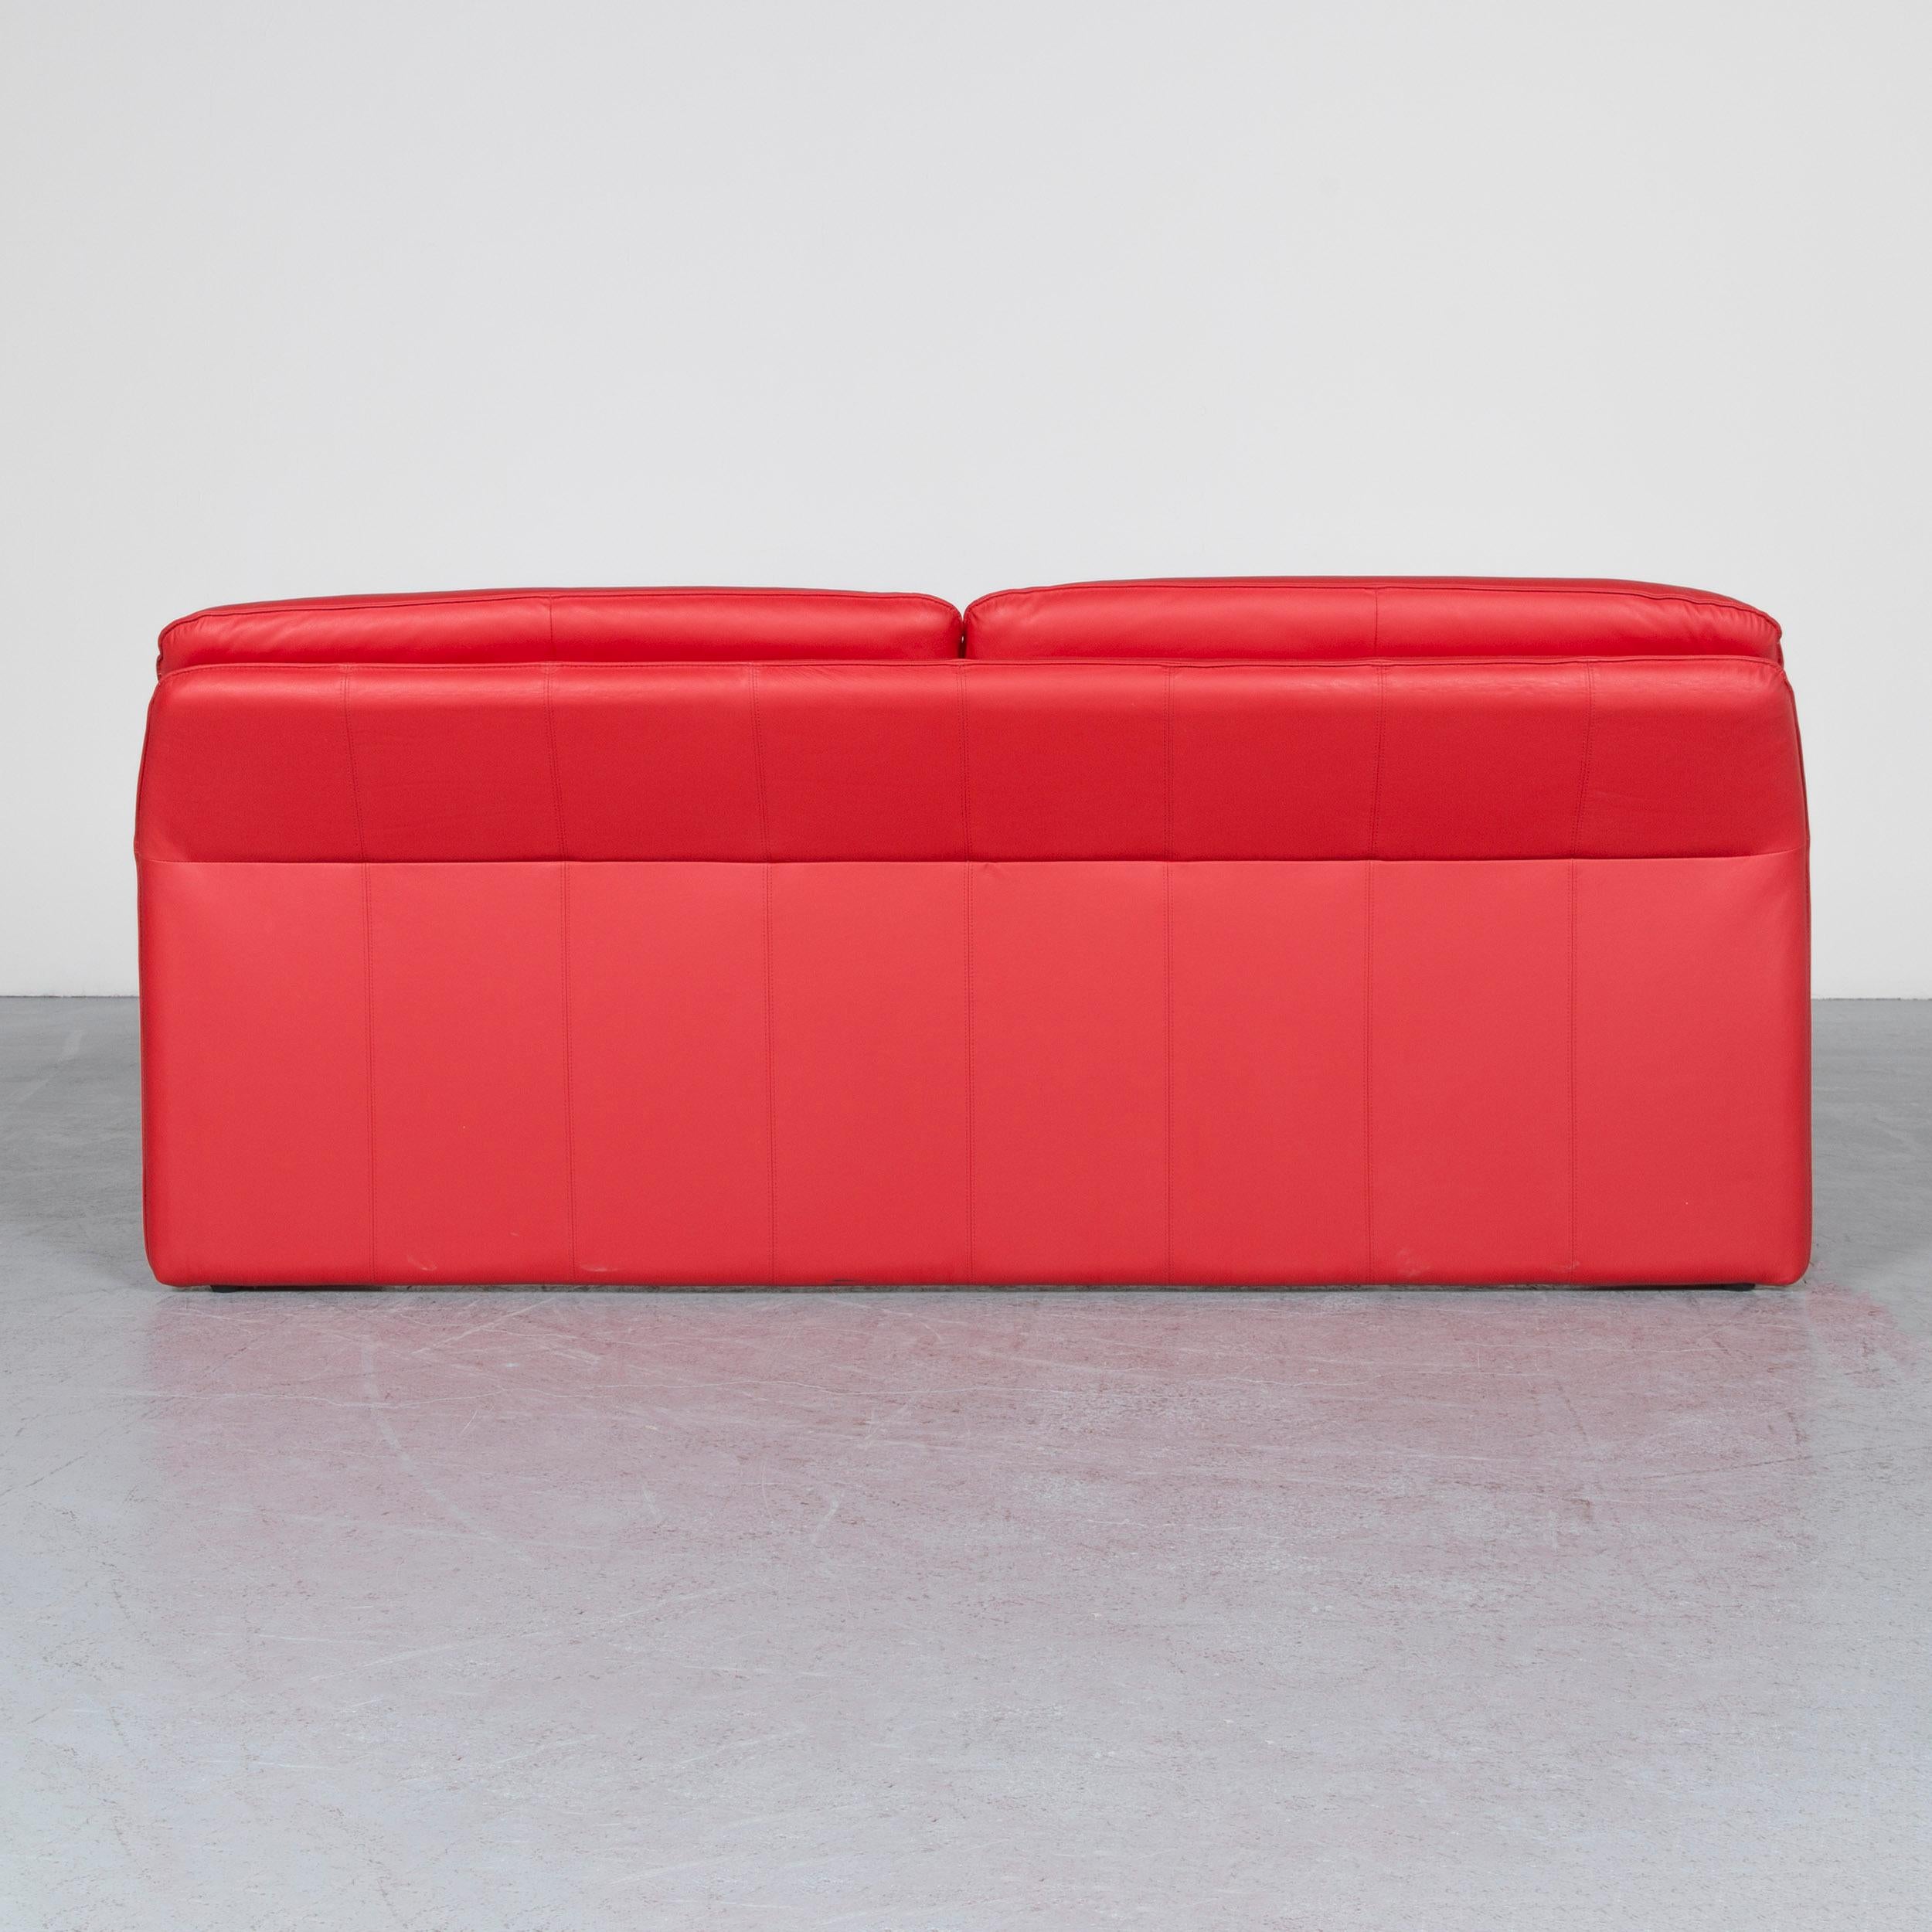 Laauser Atlanta Designer Sofa Leather Red Two-Seat Couch Modern For Sale 4